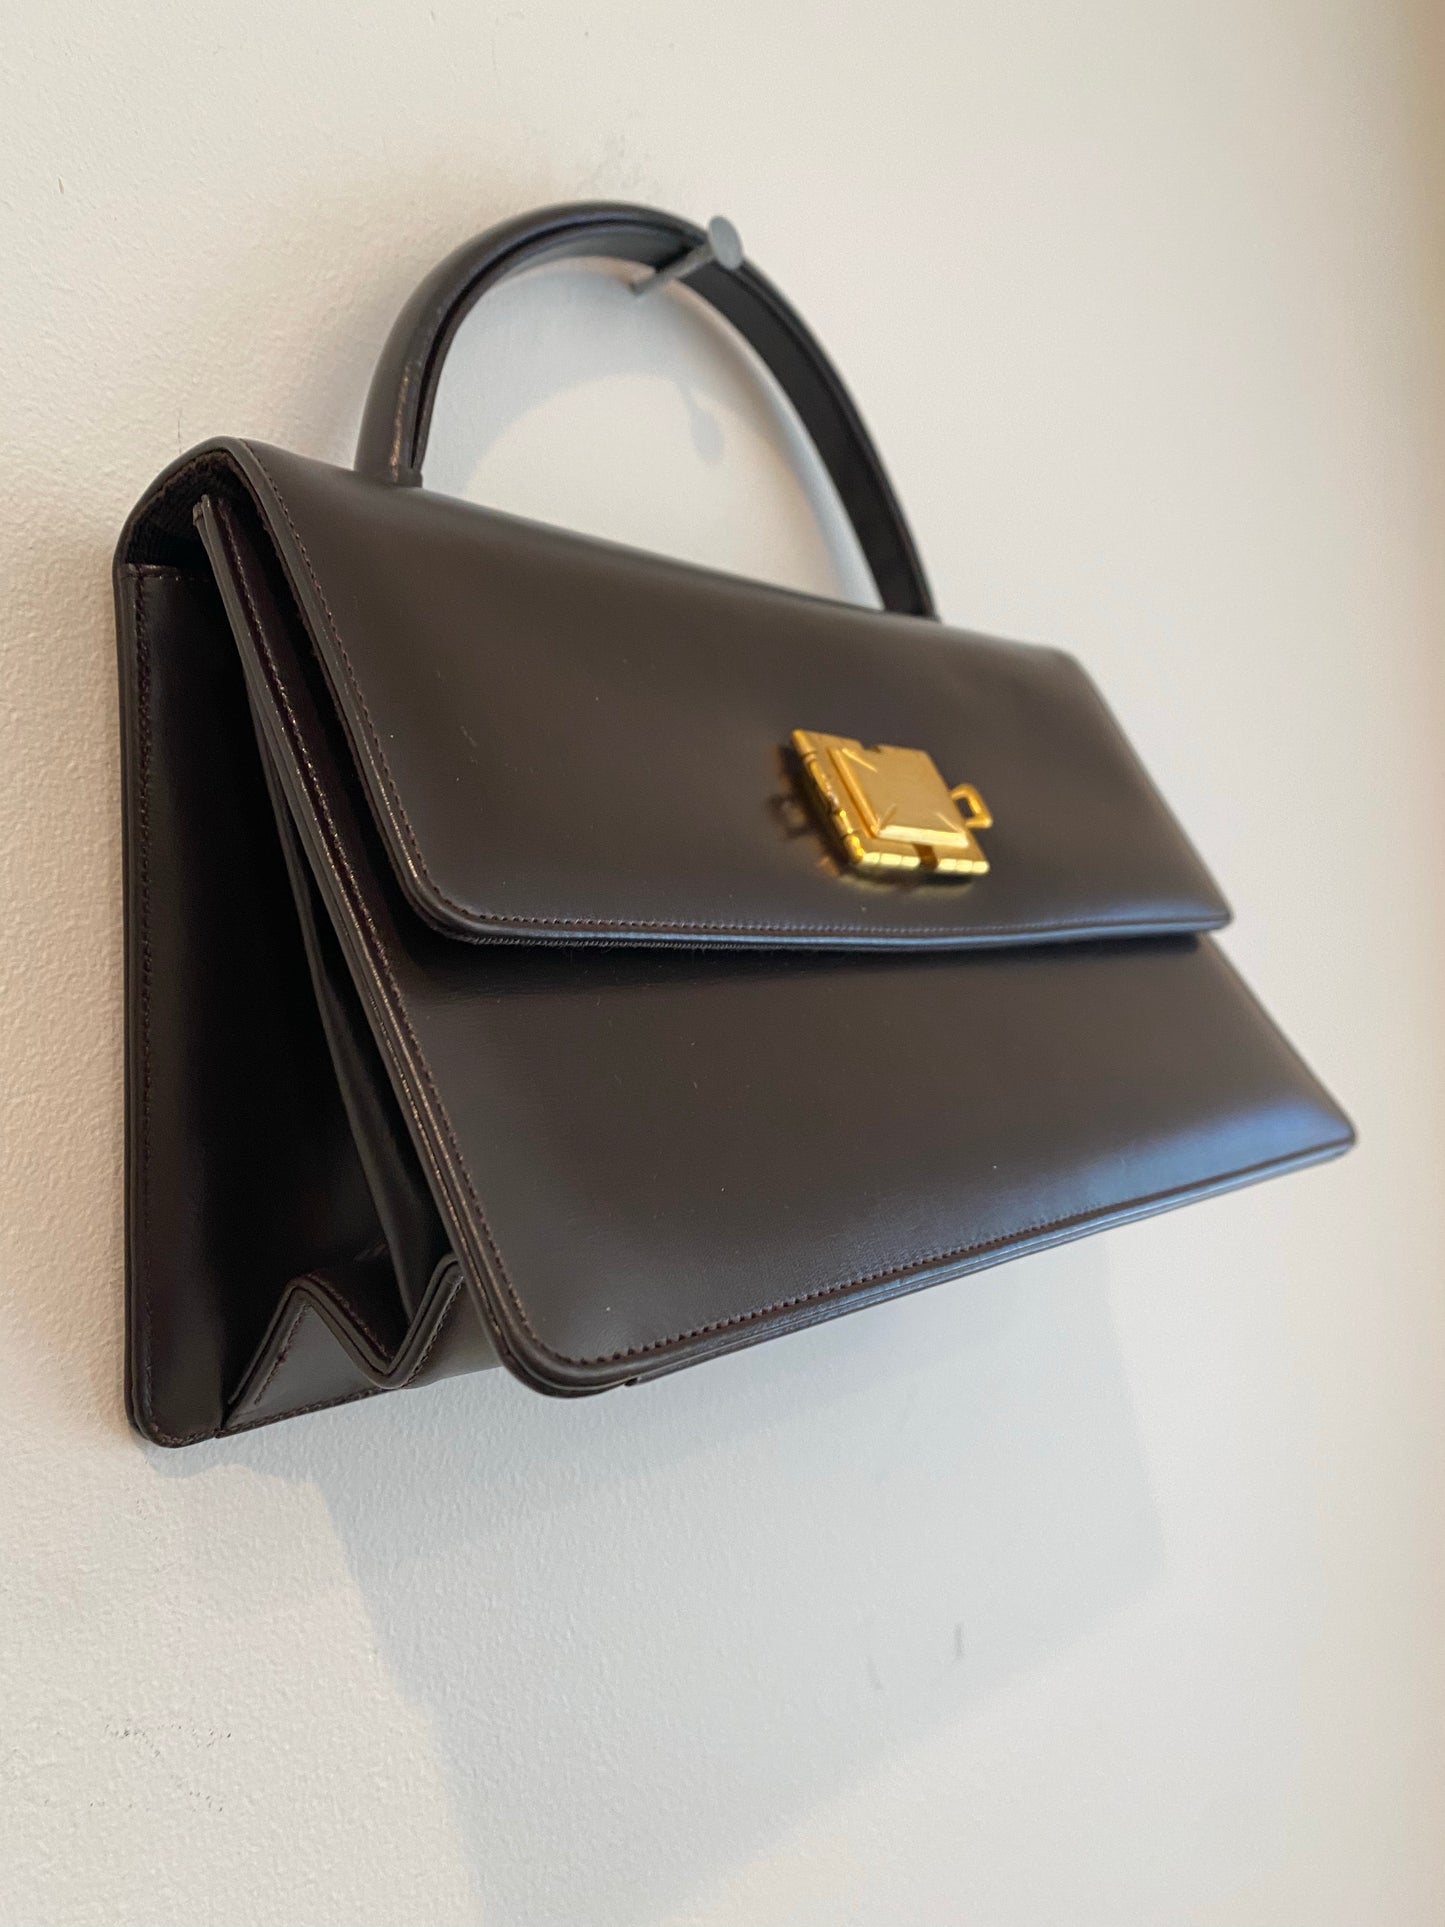 Brown Structured Handbag with Gold Square Clasp